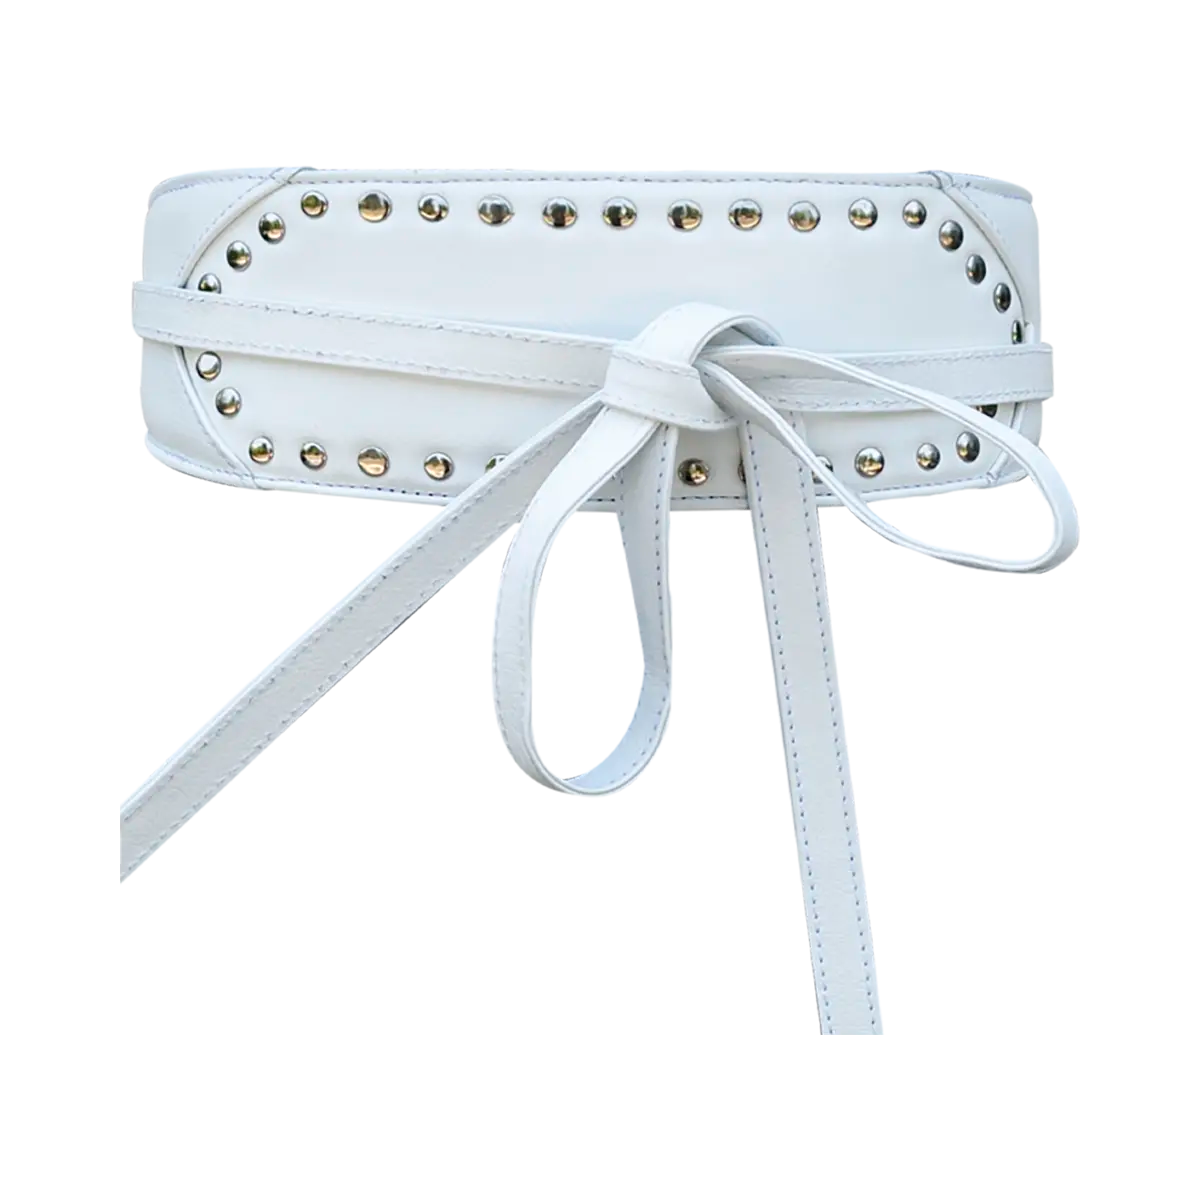 leather white studded Wrap-Around Belt For Women. Fashionable accessories for women. Shop in San Diego, CA.